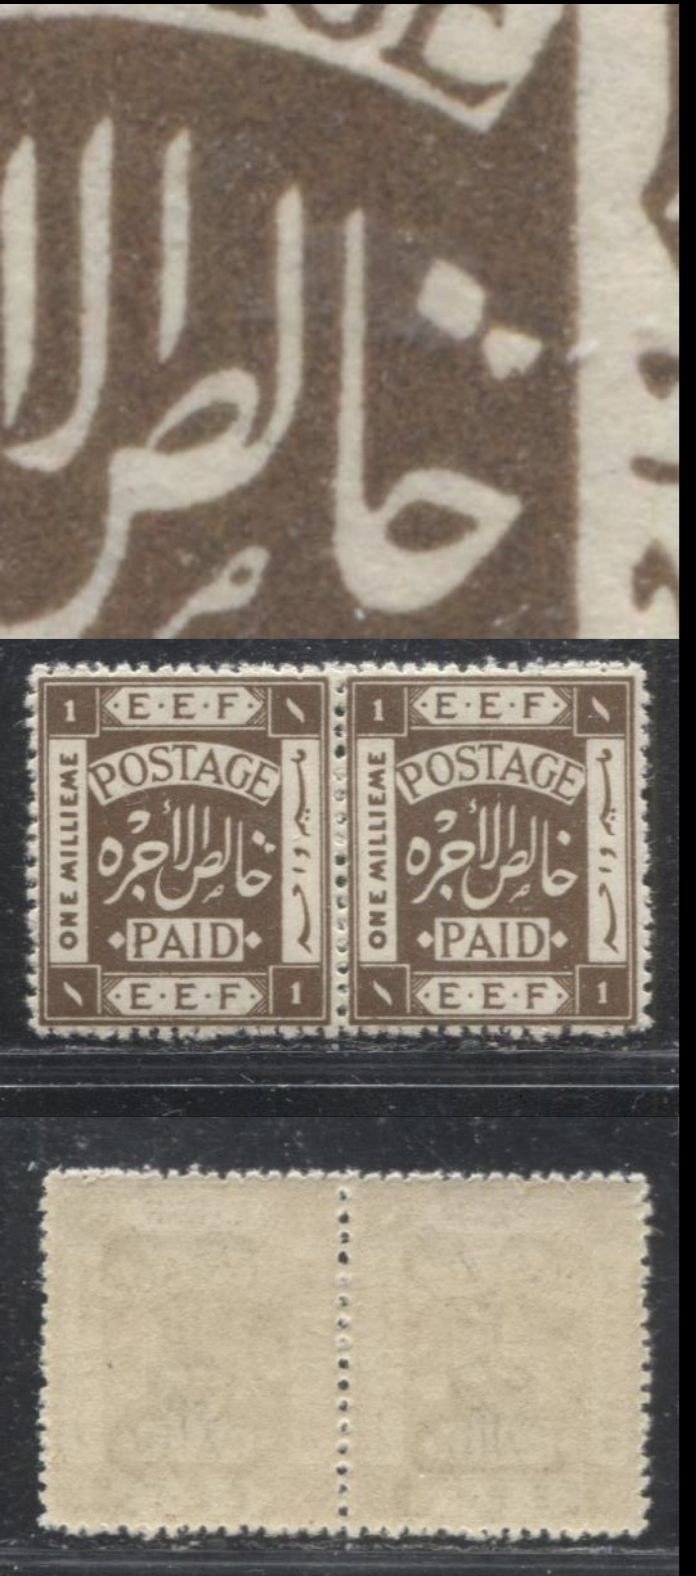 Lot 3 Palestine SG#5arp 1m Deep Brown "Postage Paid" and "E.E.F" in Frame, 1918-1927 Somerset House Lithographed Issue, A VFNH Pair, Perf. 15 x 14, Royal Cypher Watermark, Showing White Patch in Middle From Position 91, Rough Perf.